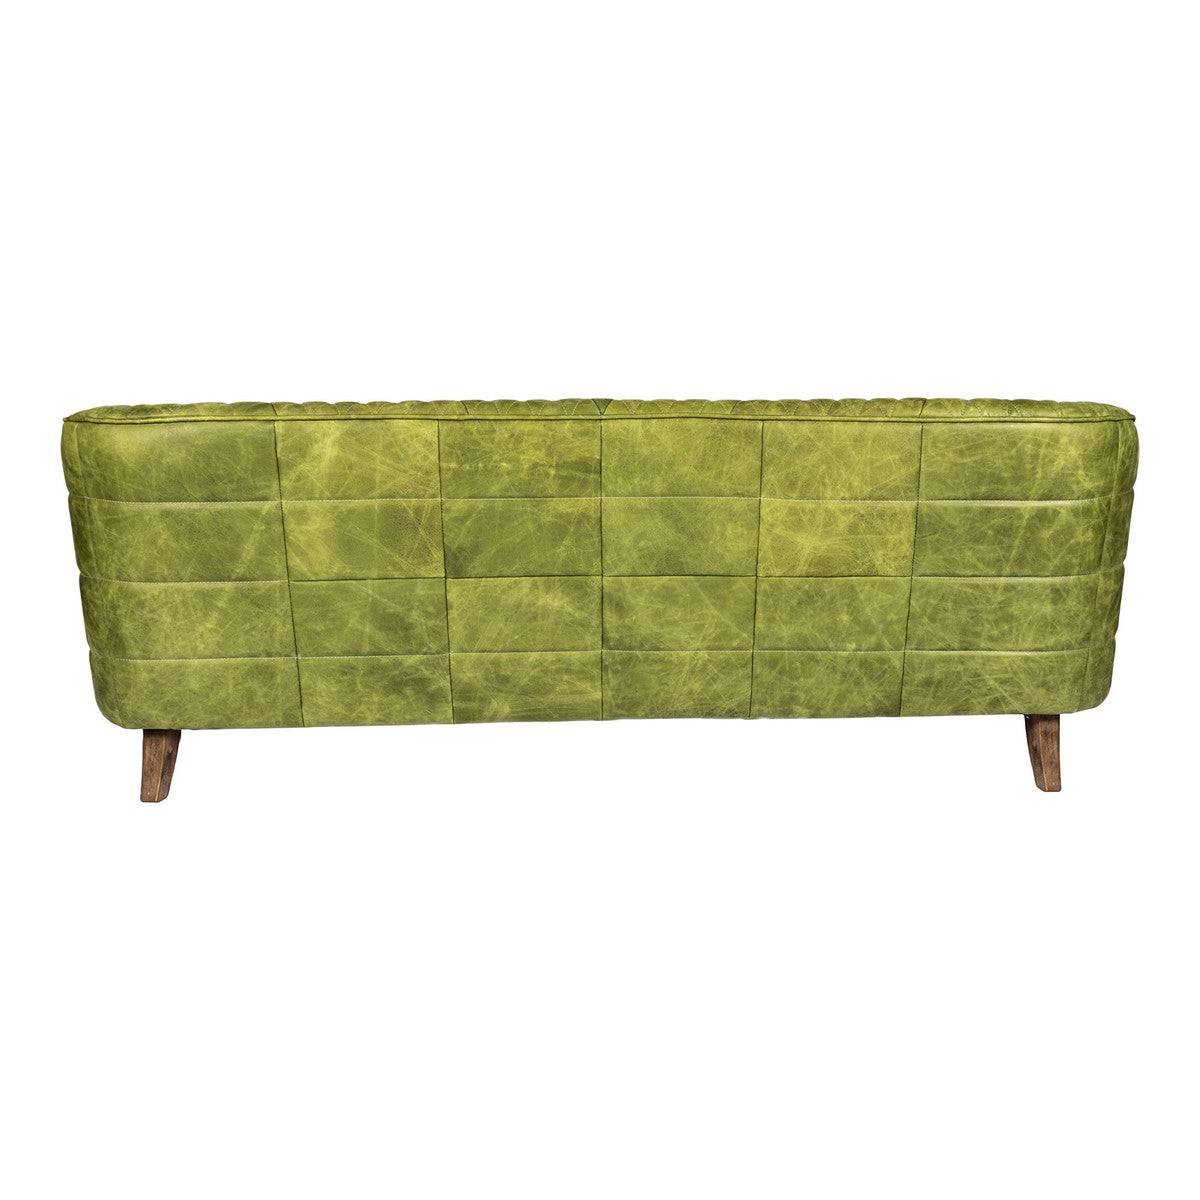 Moe's Home Collection Magdelan Tufted Leather Sofa Emerald - PK-1077-27